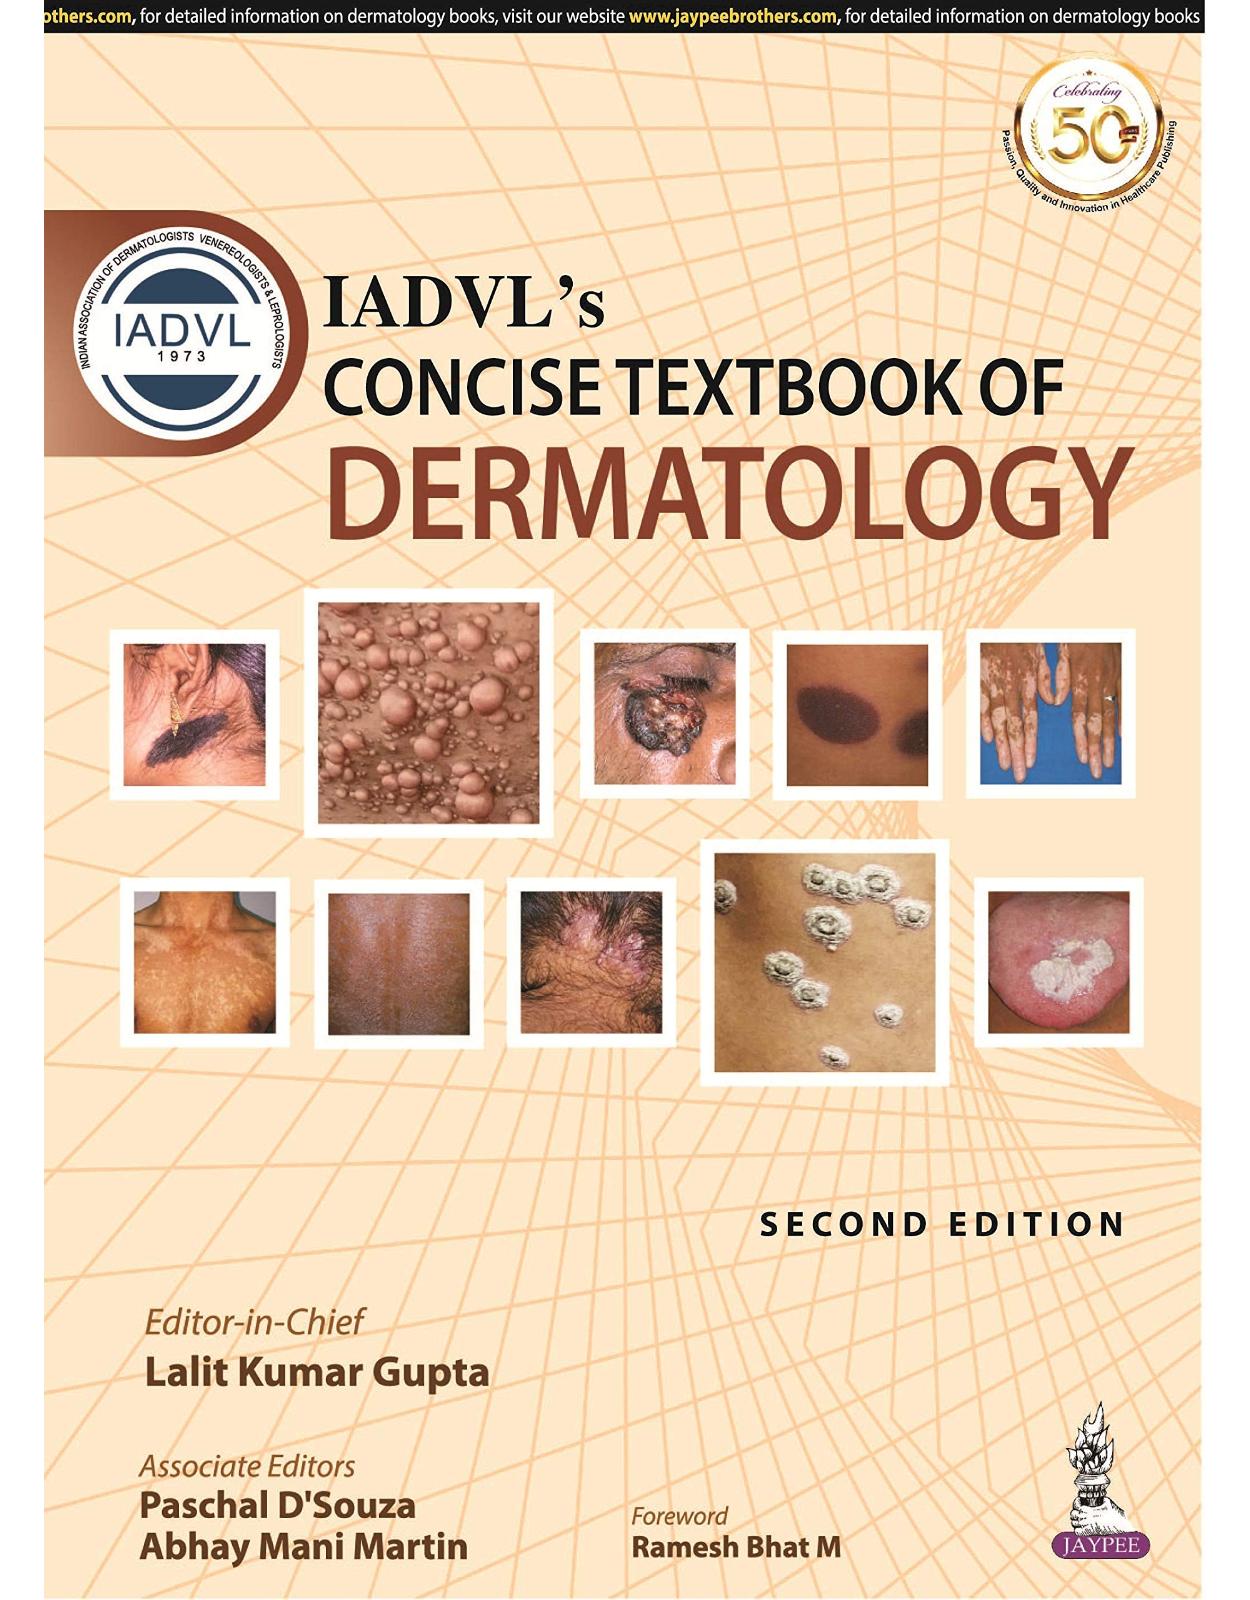 IADVL’s Concise Textbook of Dermatology